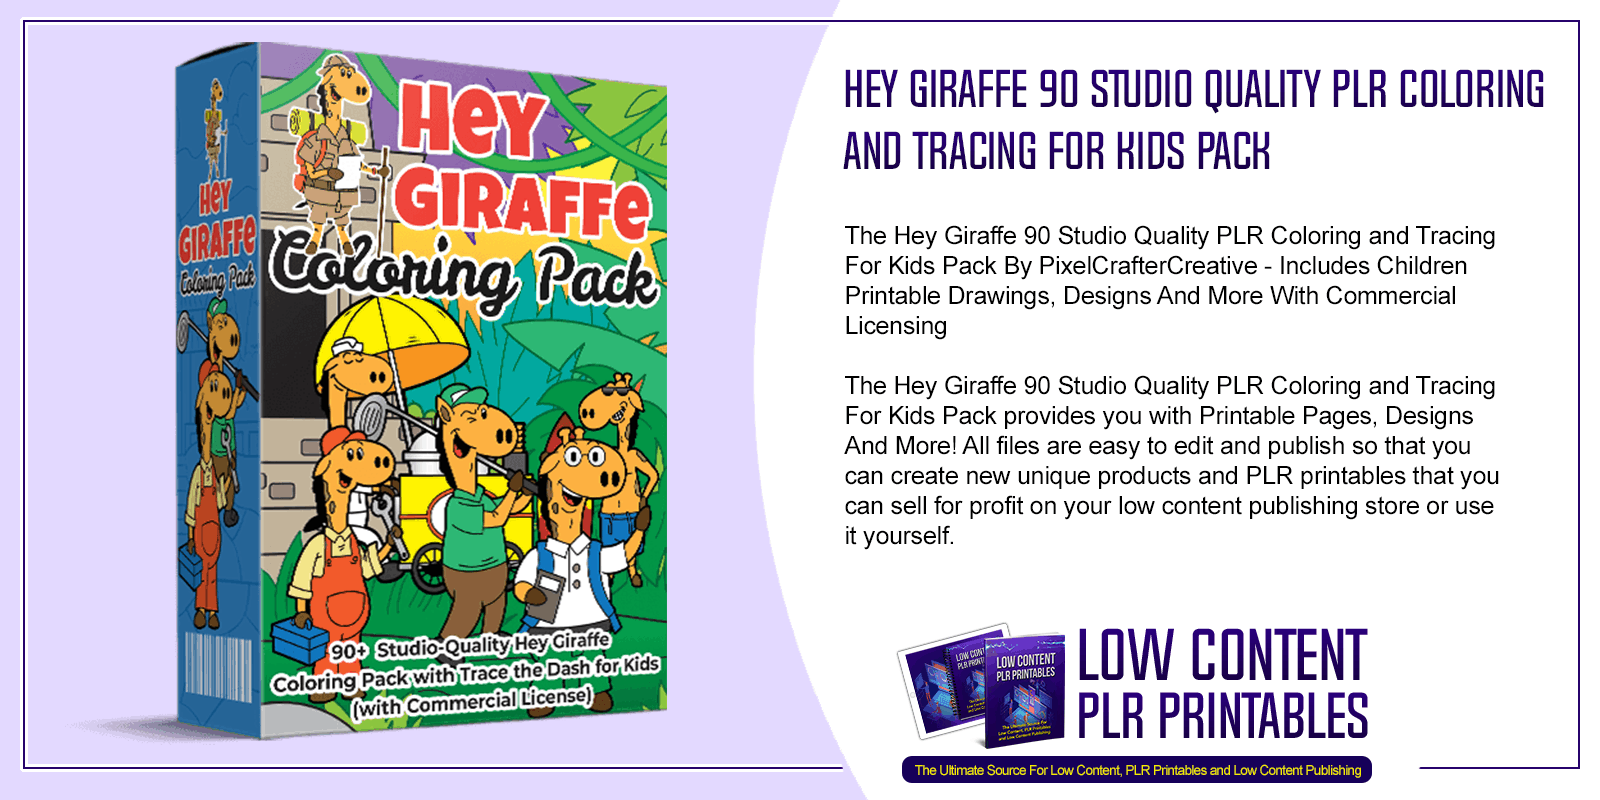 Hey Giraffe 90 Studio Quality PLR Coloring and Tracing For Kids Pack